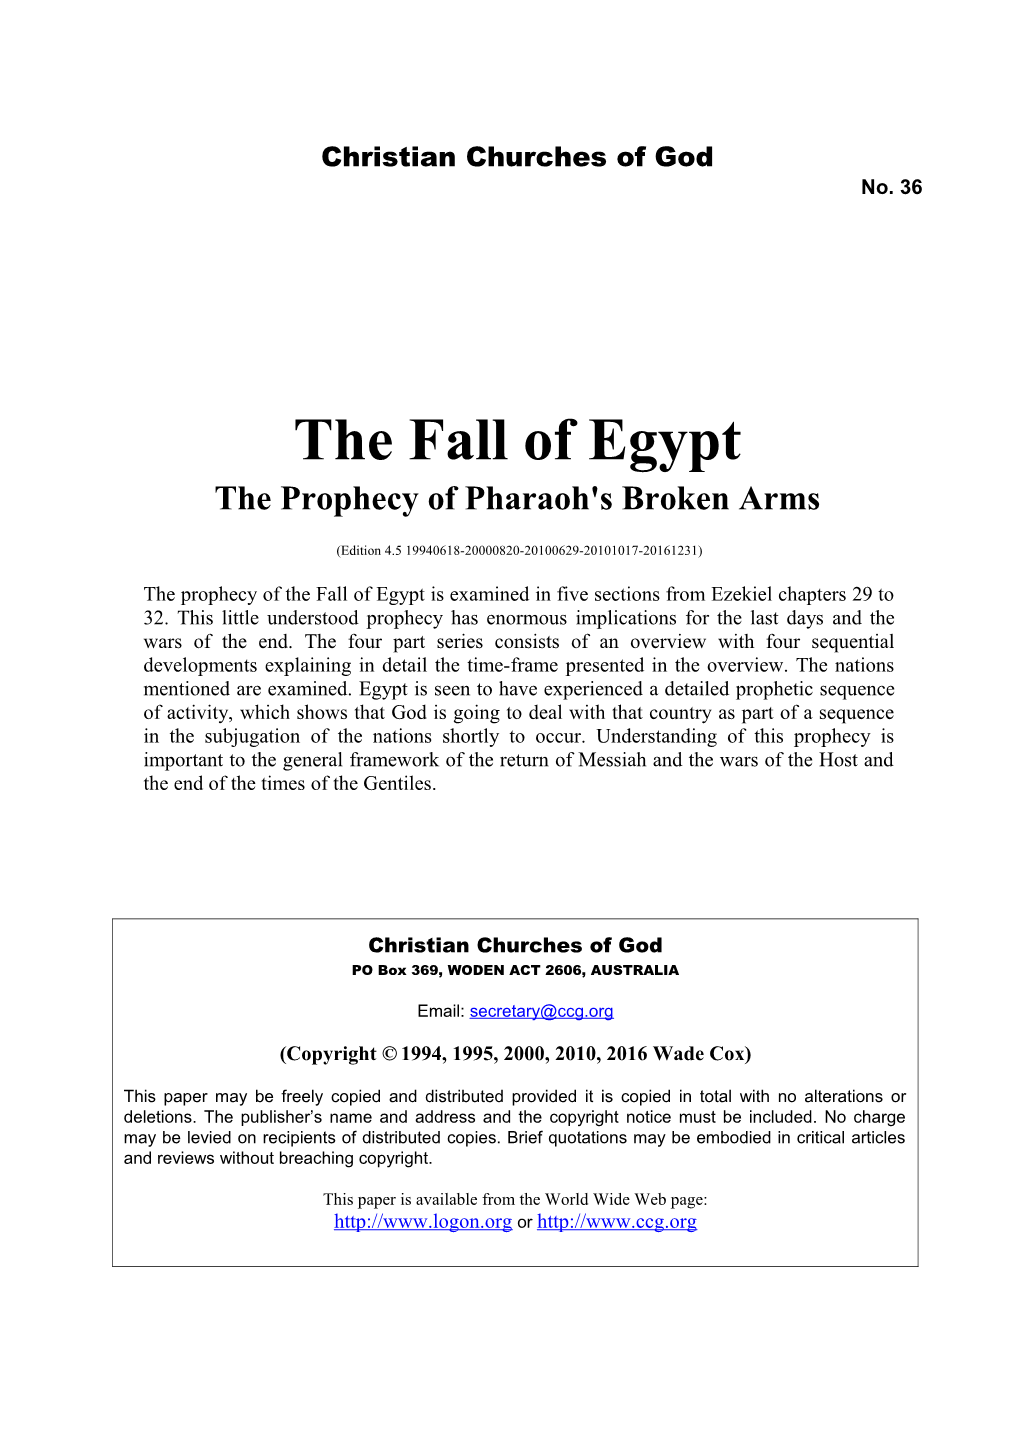 The Fall of Egypt (No. 36)